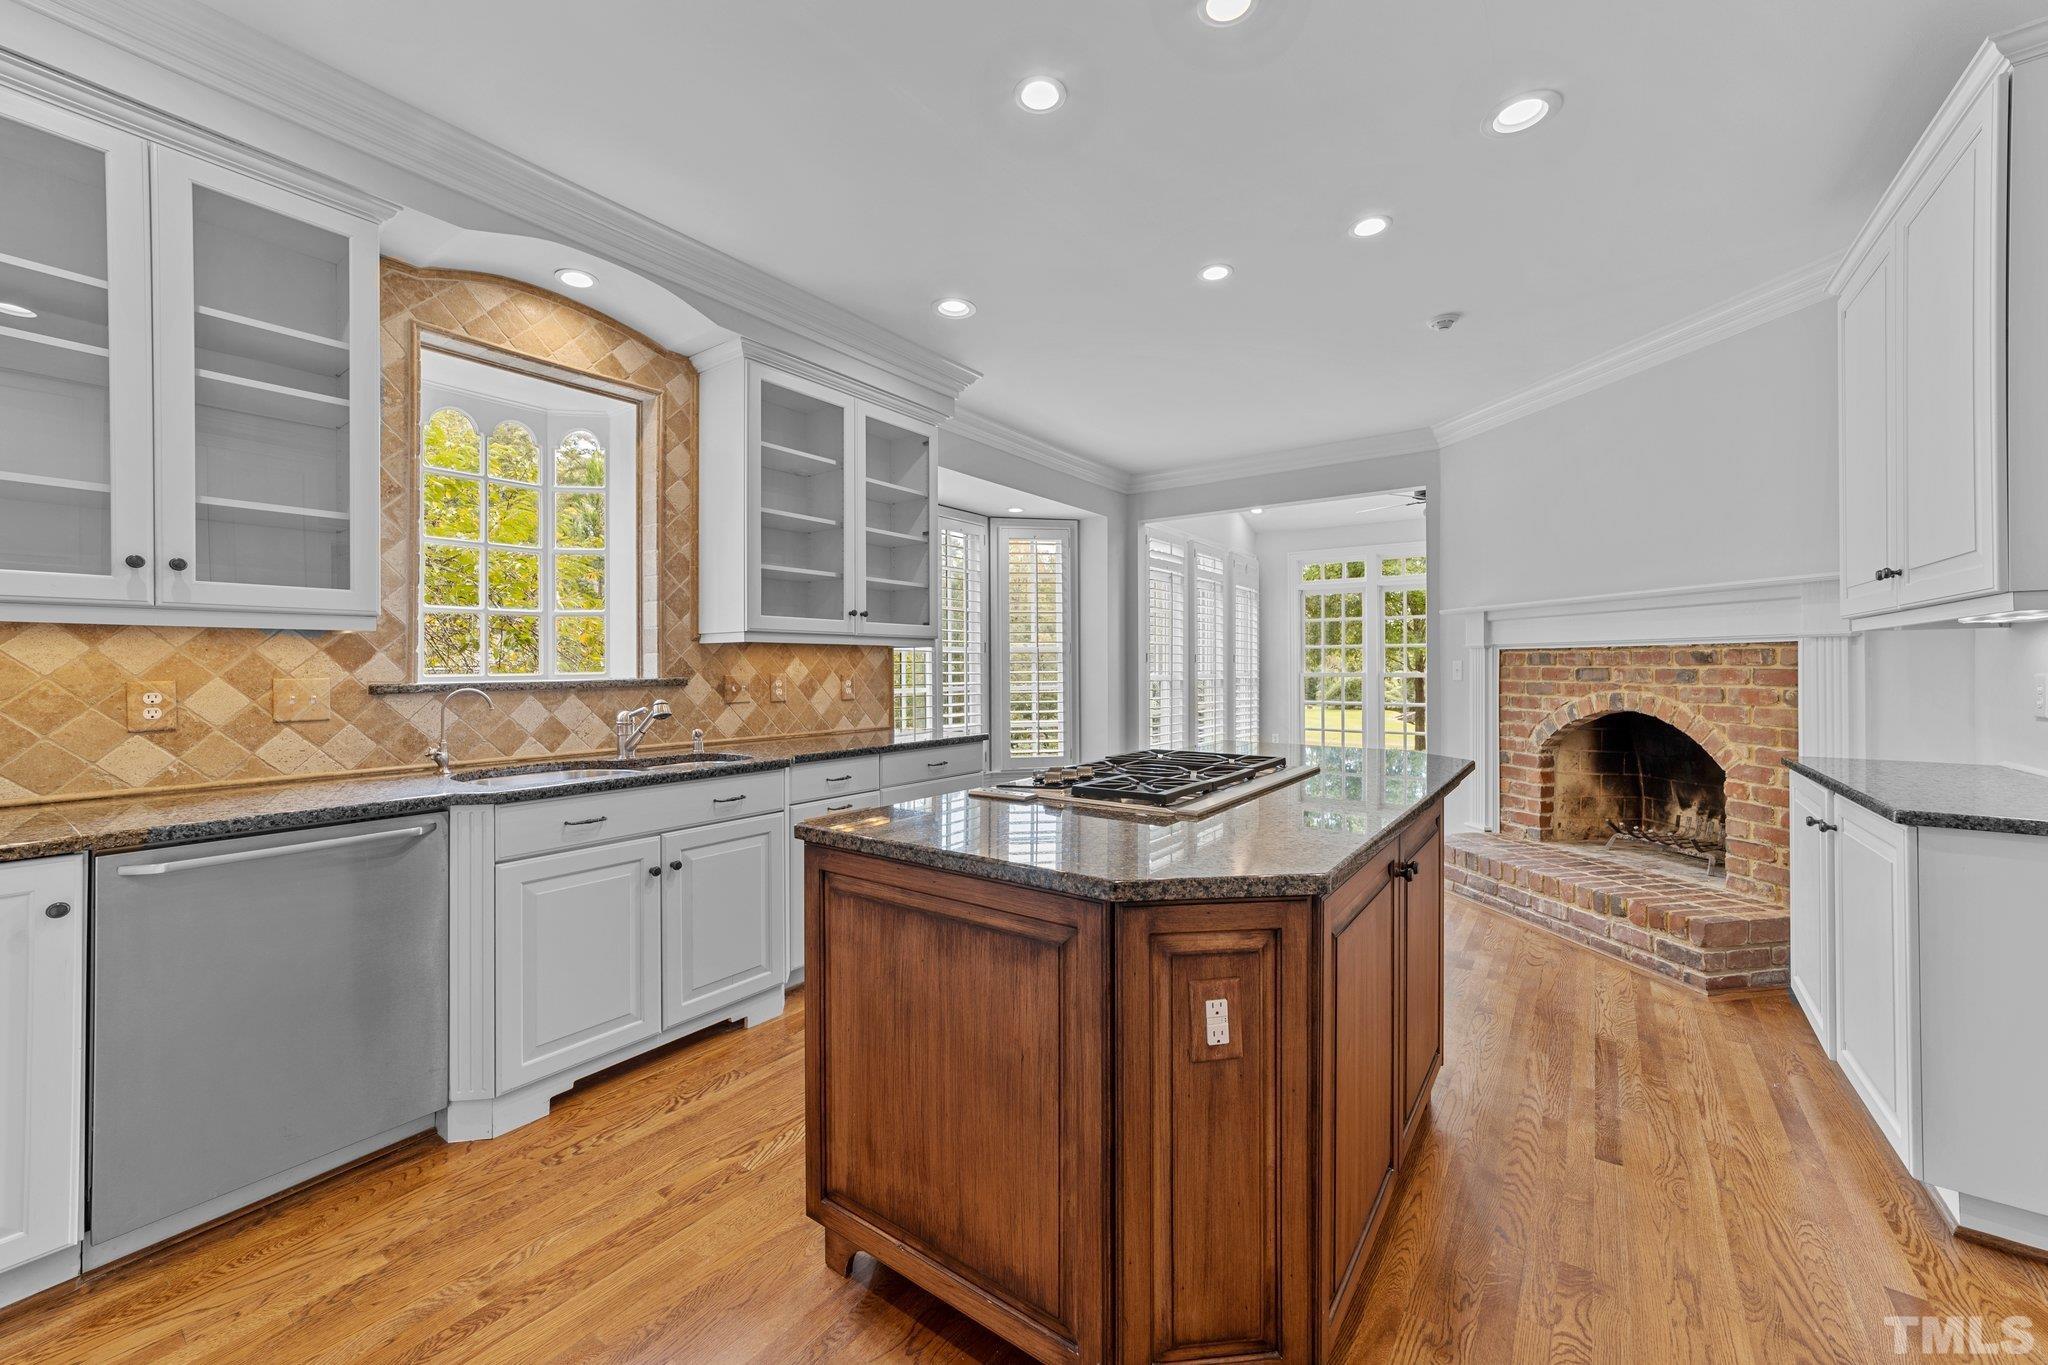 Well appointed Kitchen with fireplace, center island and breakfast alcove.